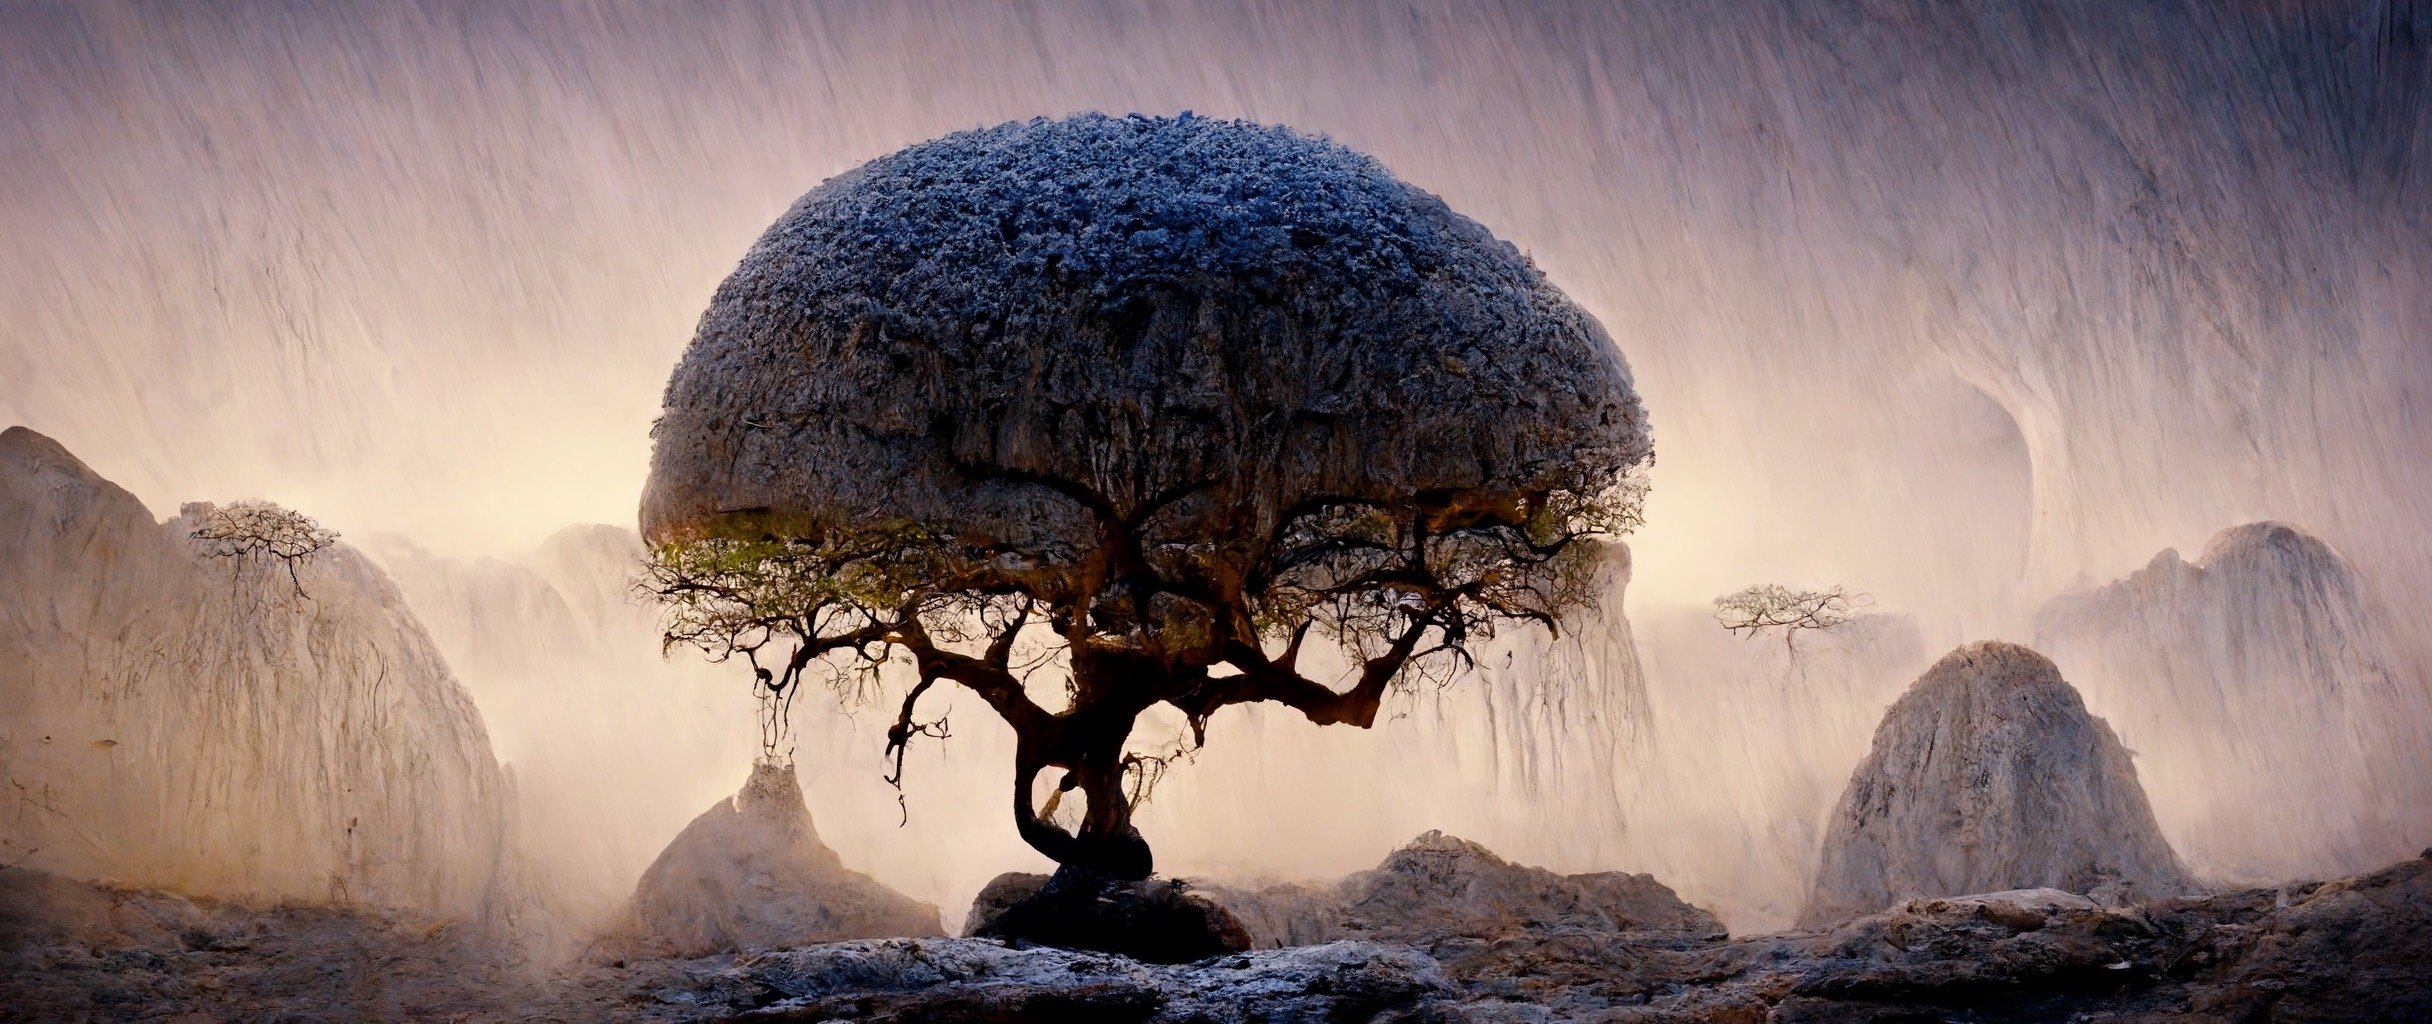 d4bee993-2474-4d92-b7d0-1d3b77bc1147_S3RAPH_frozen_lone_magical_Baobab_tree_of_life_in_center_of_a_dramatic_cave_with_lush_vines._cinematic_comp.JPG